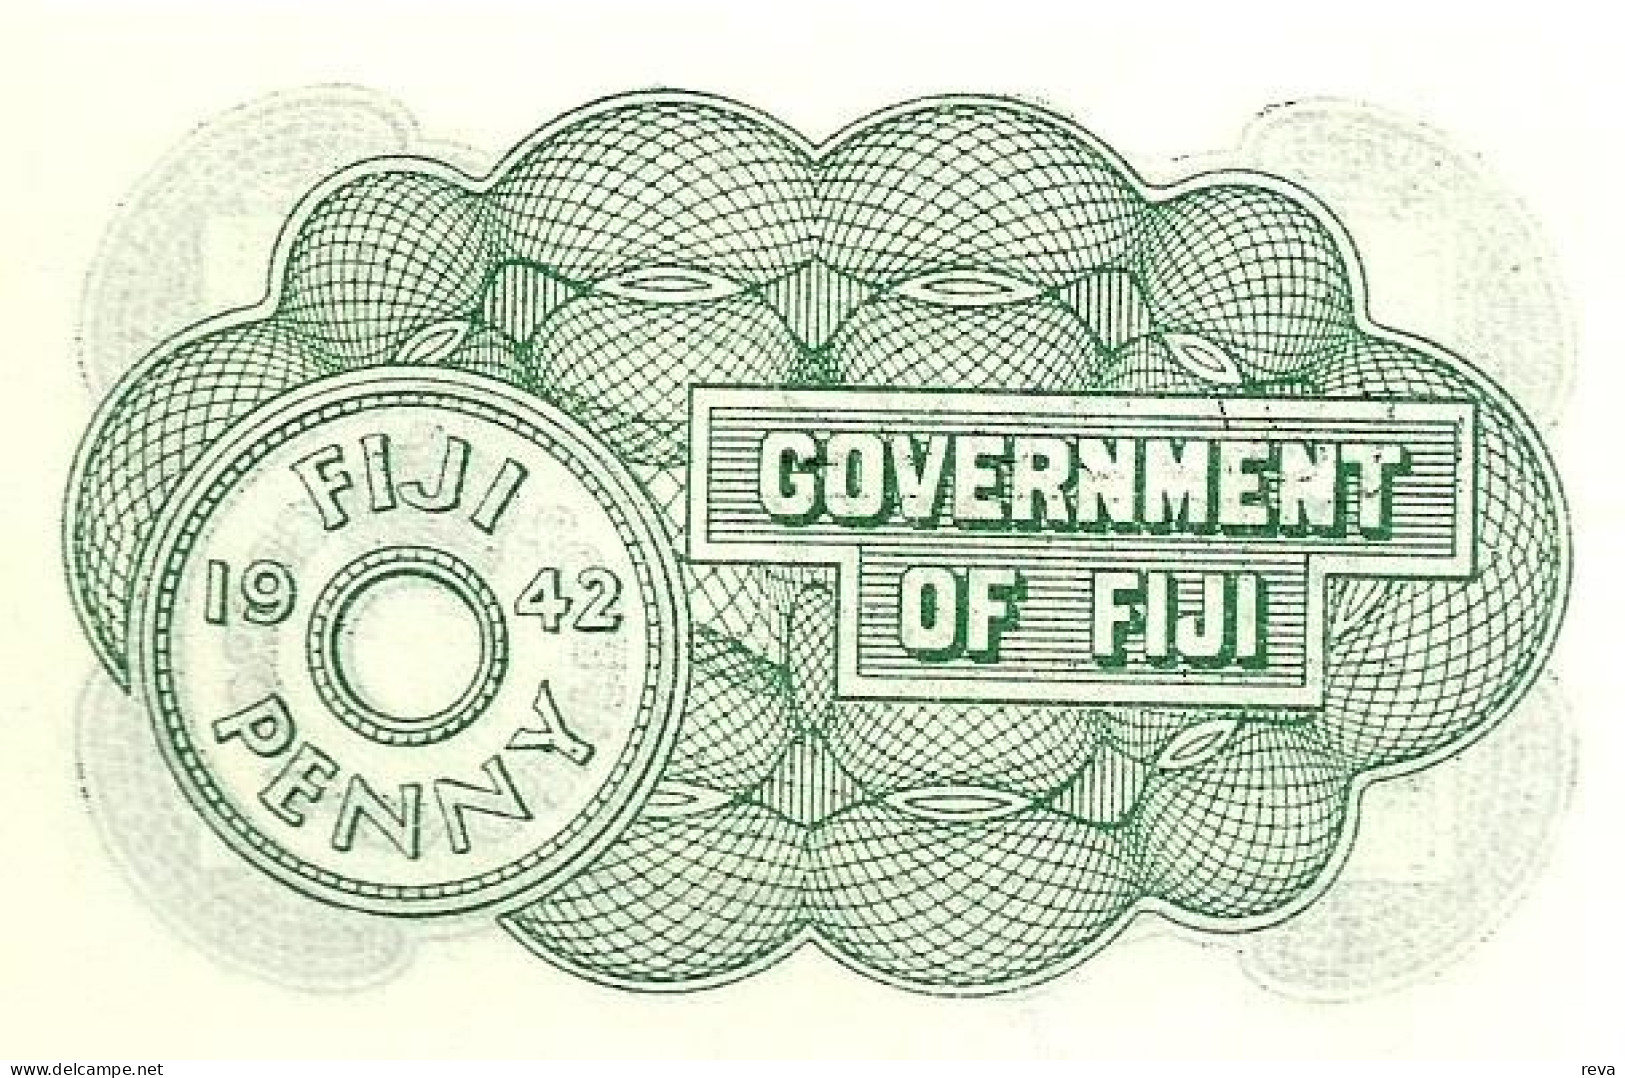 FIJI 1 PENNY GREEN COIN FRONT AND BACK DATED 01-07-1942 EF P.47a READ DESCRIPTION!! - Fidschi